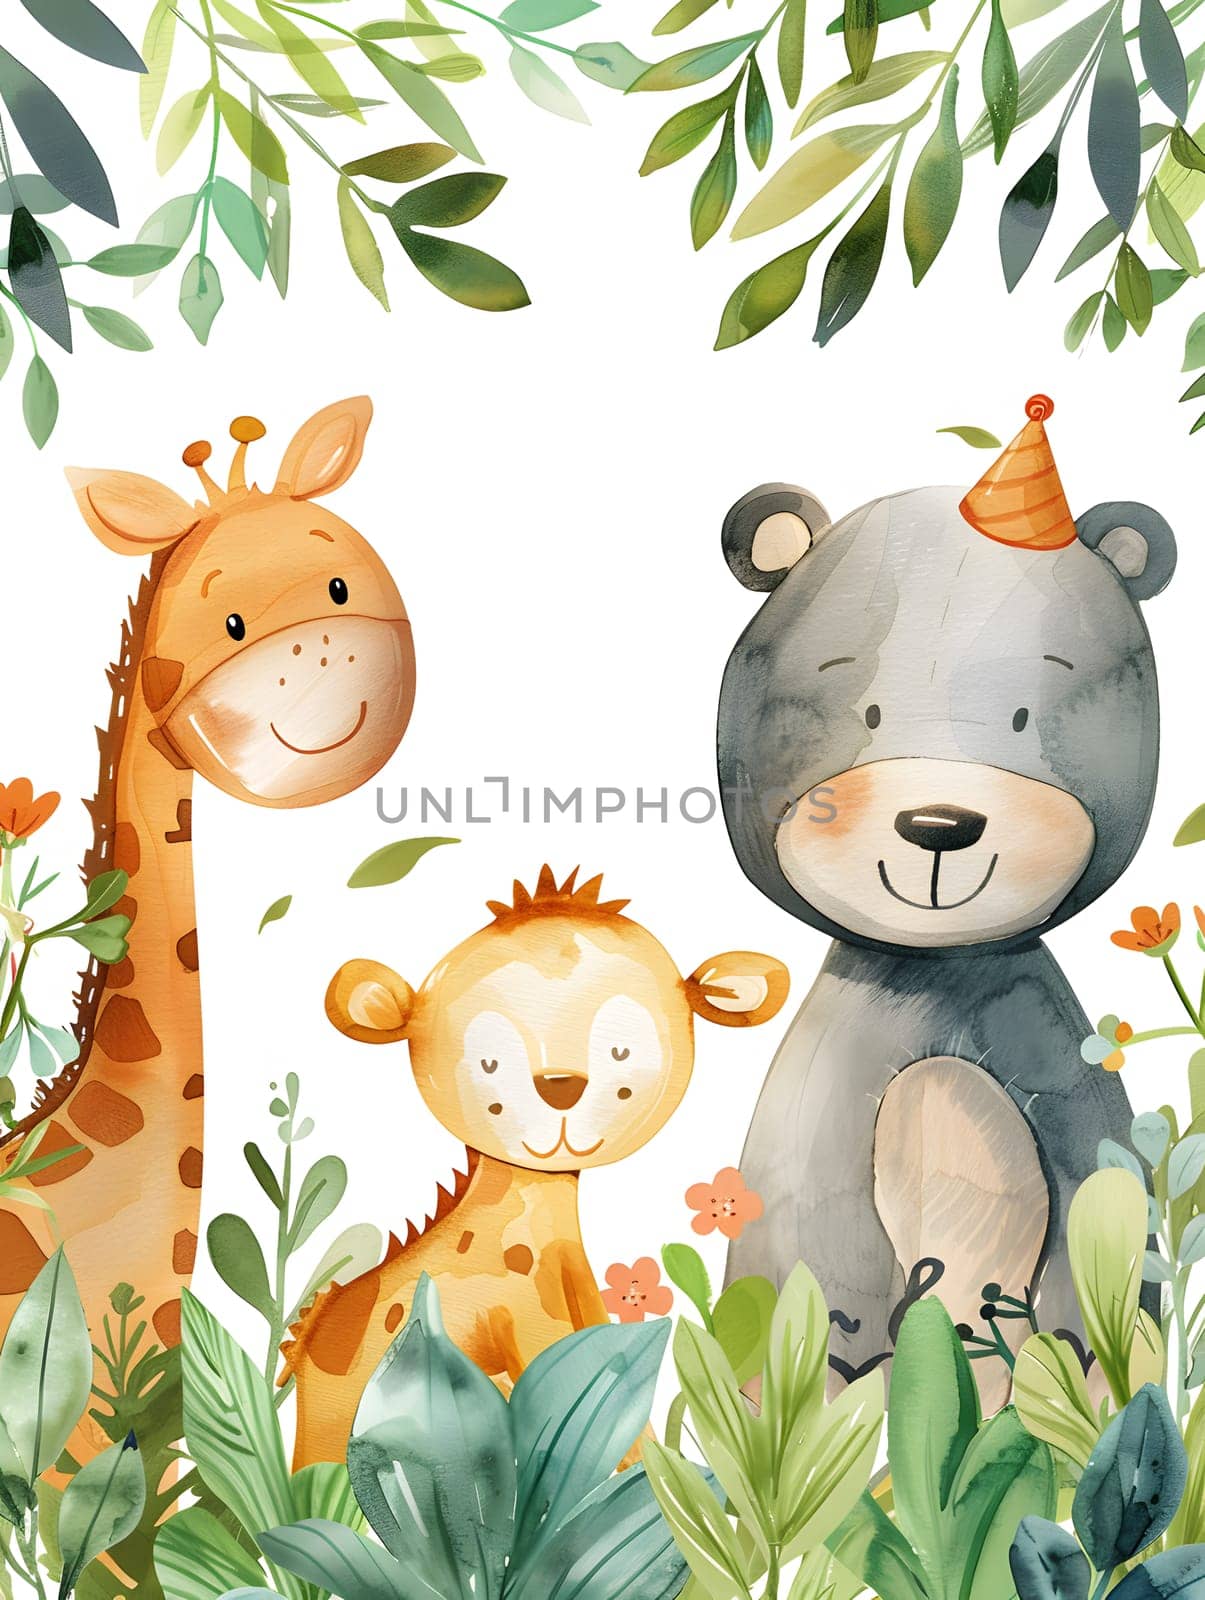 Giraffe, monkey, and bear happily sitting in jungle amongst grass and fawns by Nadtochiy